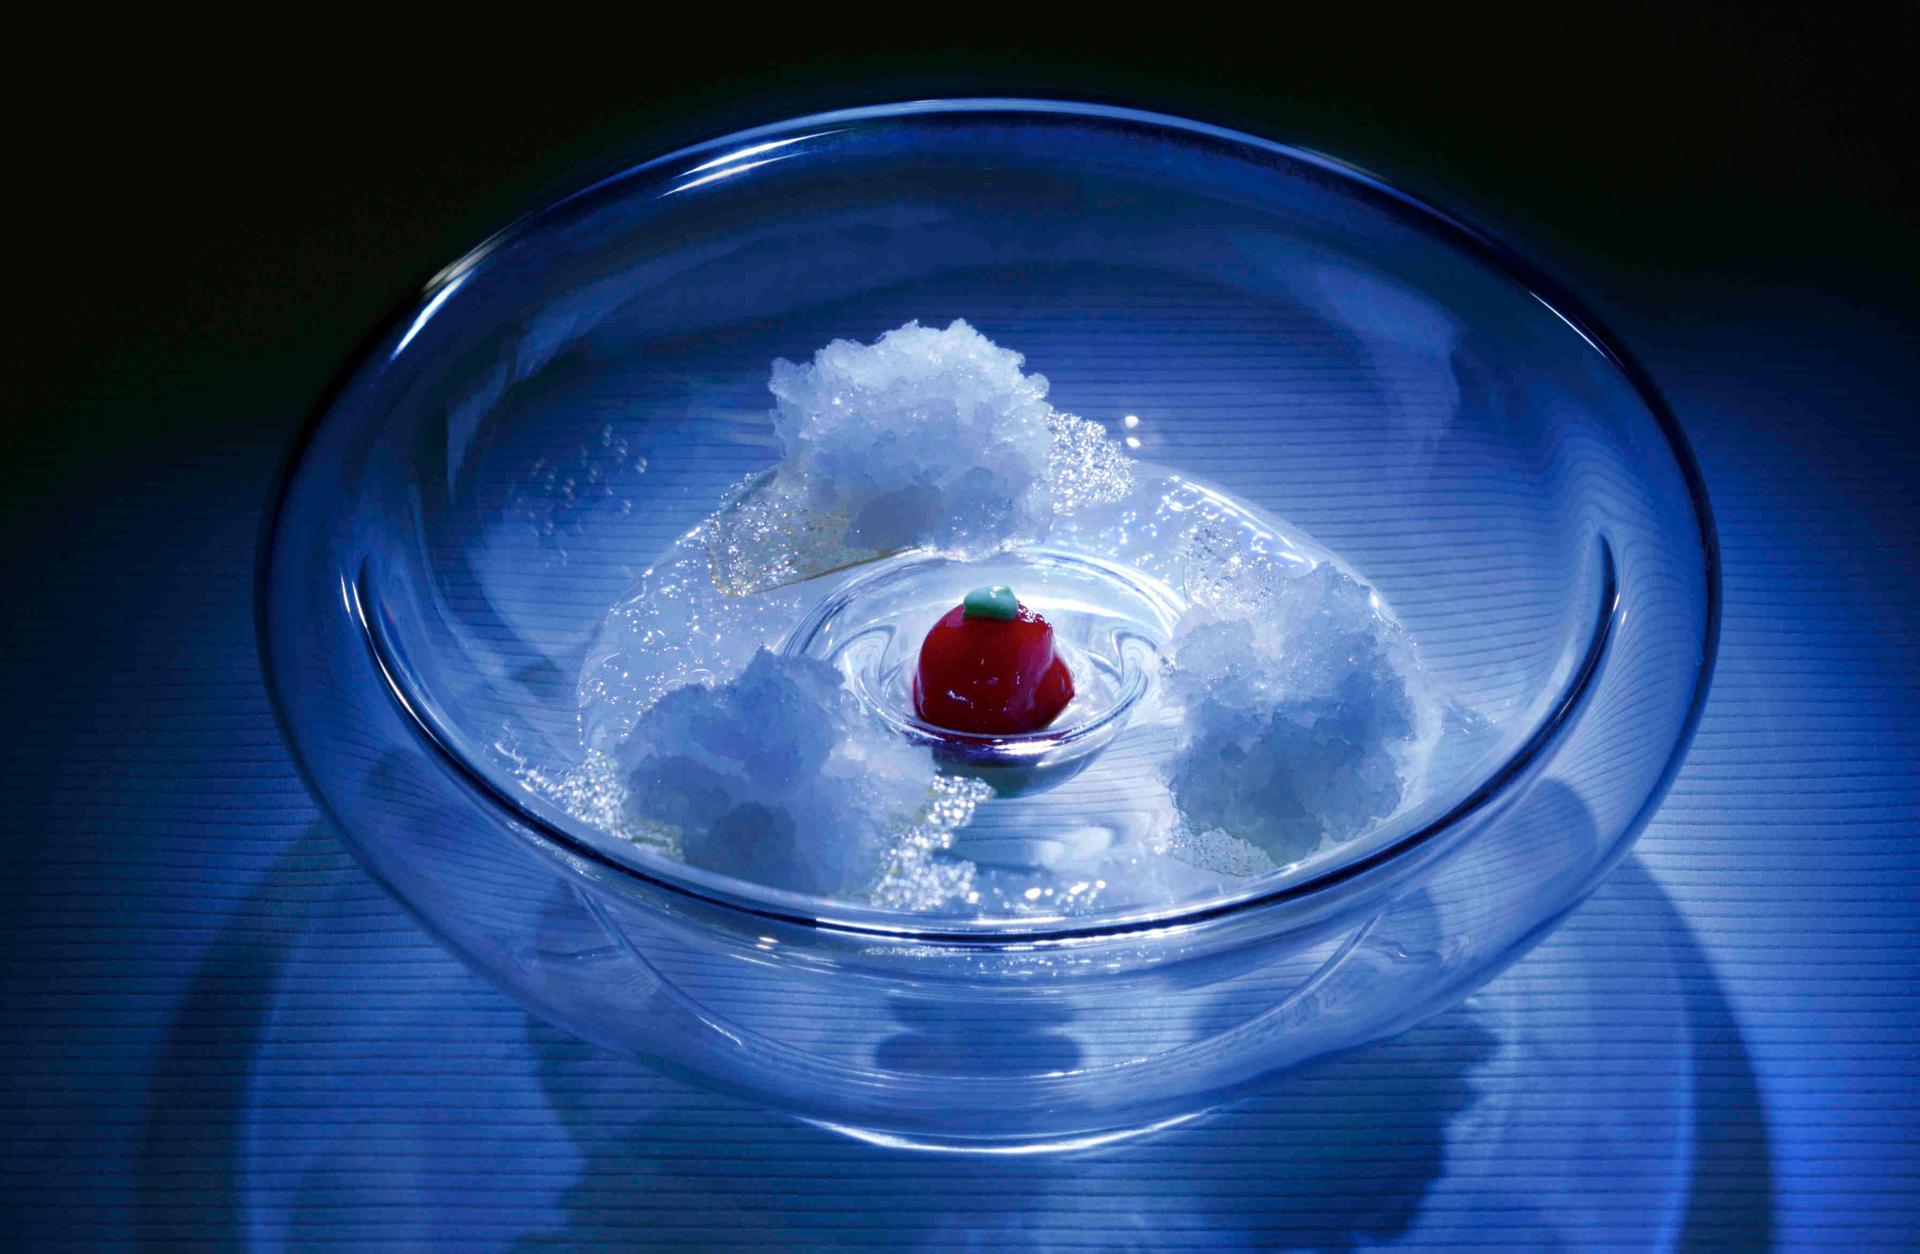 ‘Father of molecular gastronomy’ explores solution to world hunger